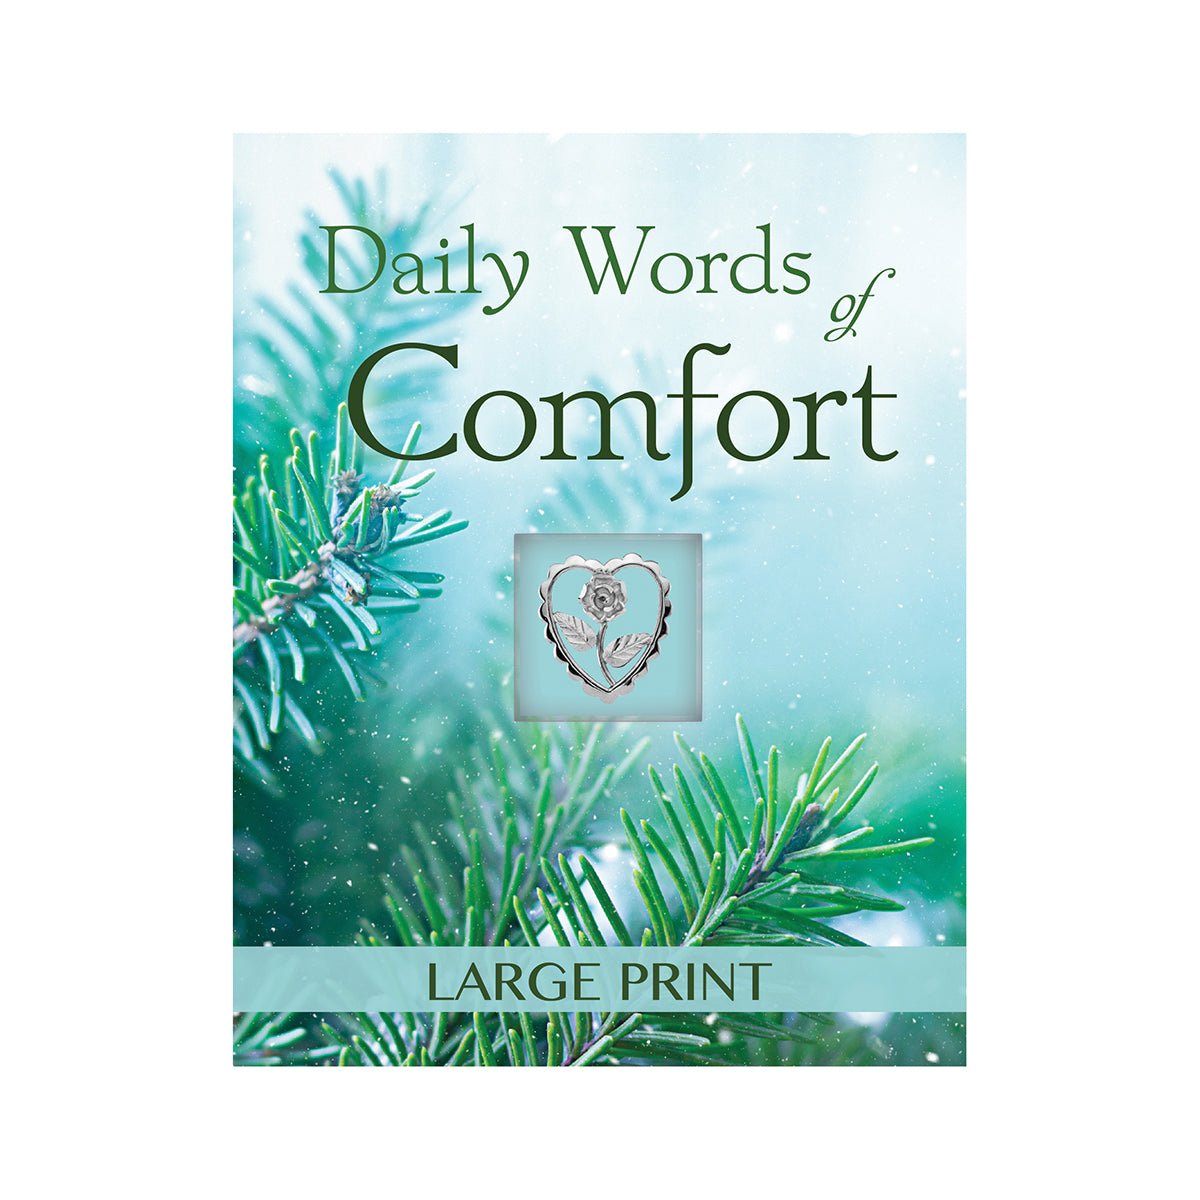 Daily Words of Comfort  Large Print